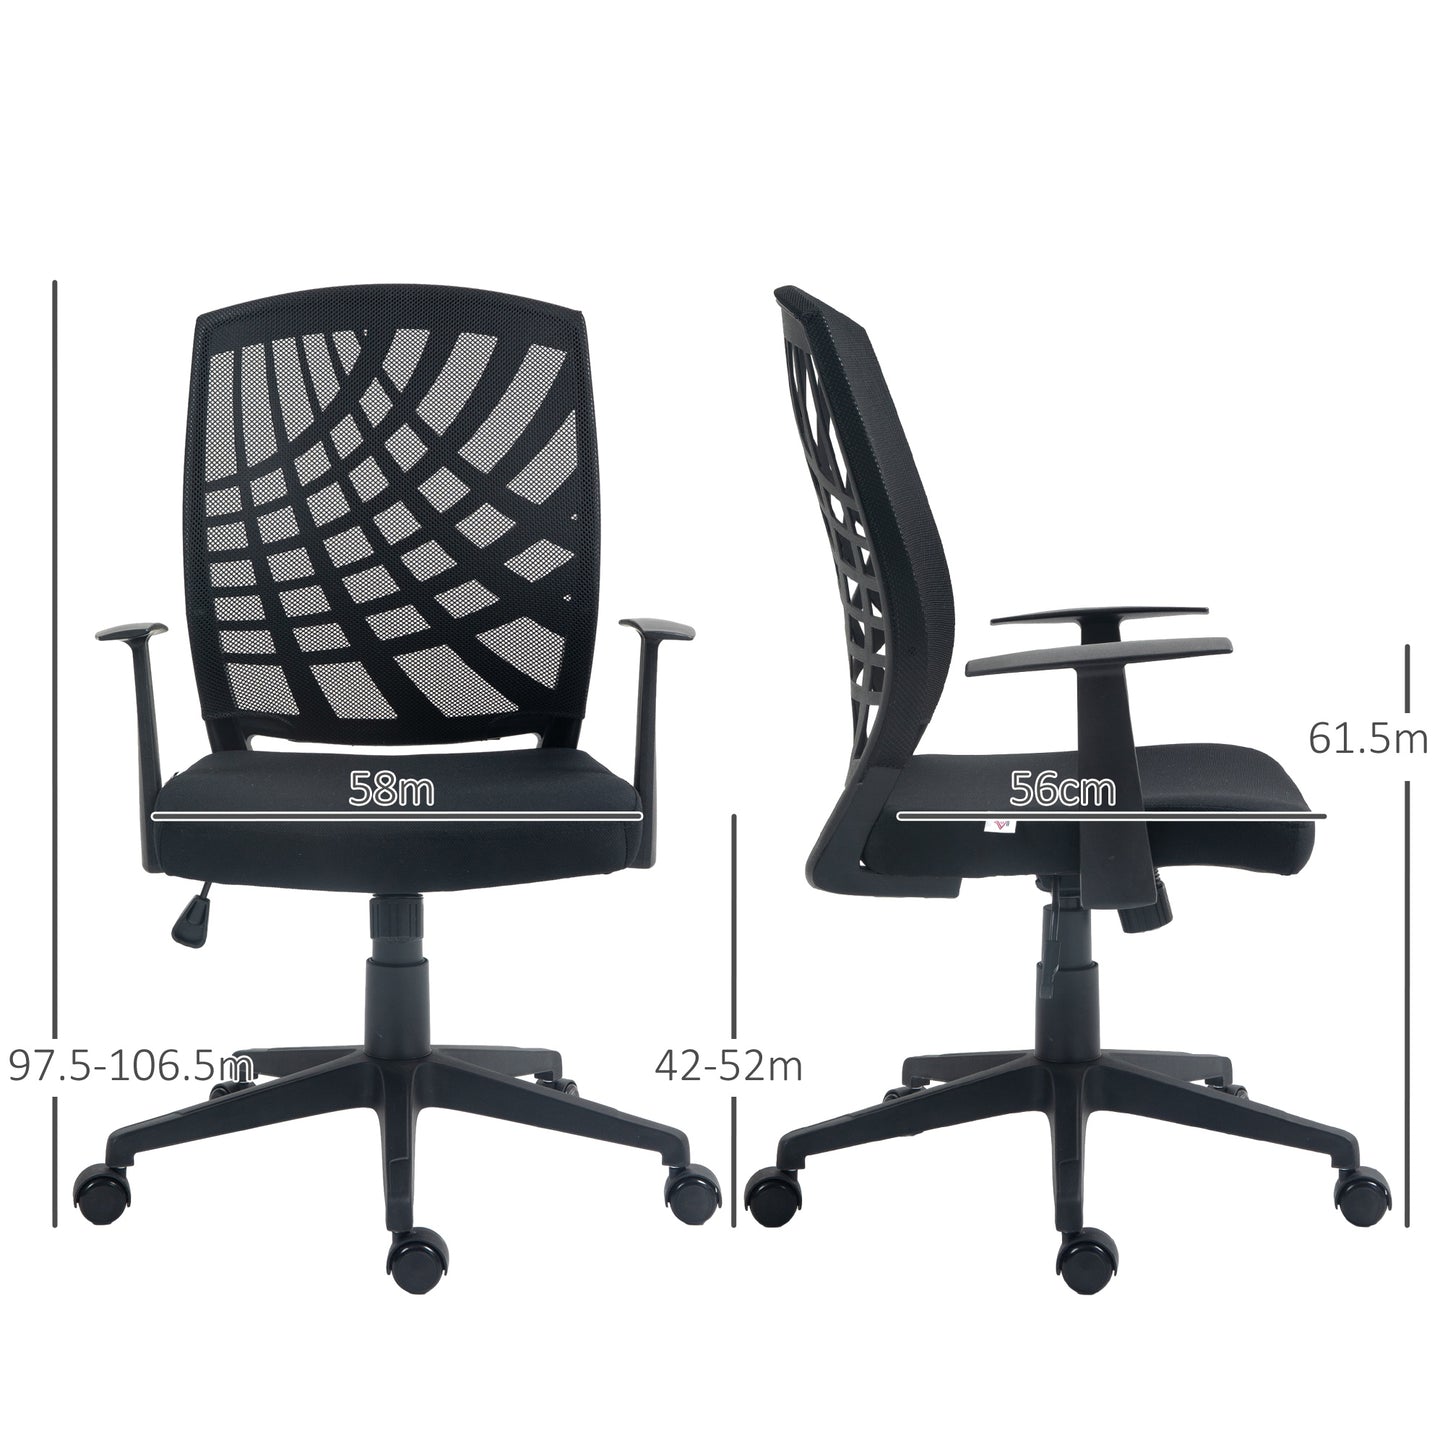 HOMCOM Ergonomic Office Chair Height Adjustable Mesh Chair Desk Chair with Swivel Wheels for Home Office Black